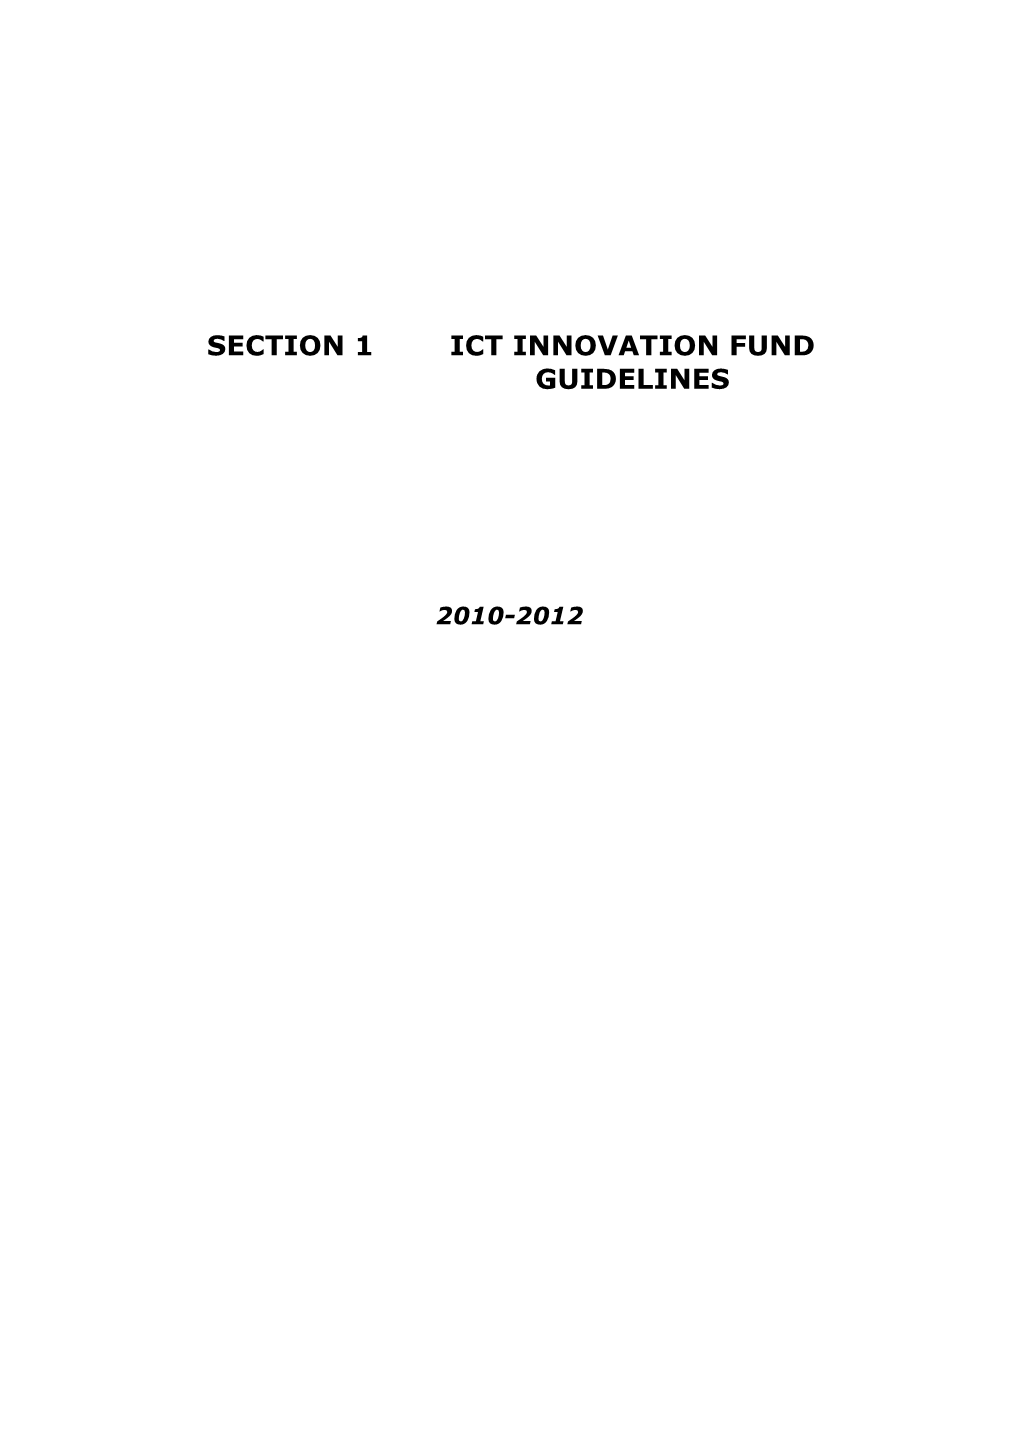 ICT Innovation Fund Guidelines 2010-2012